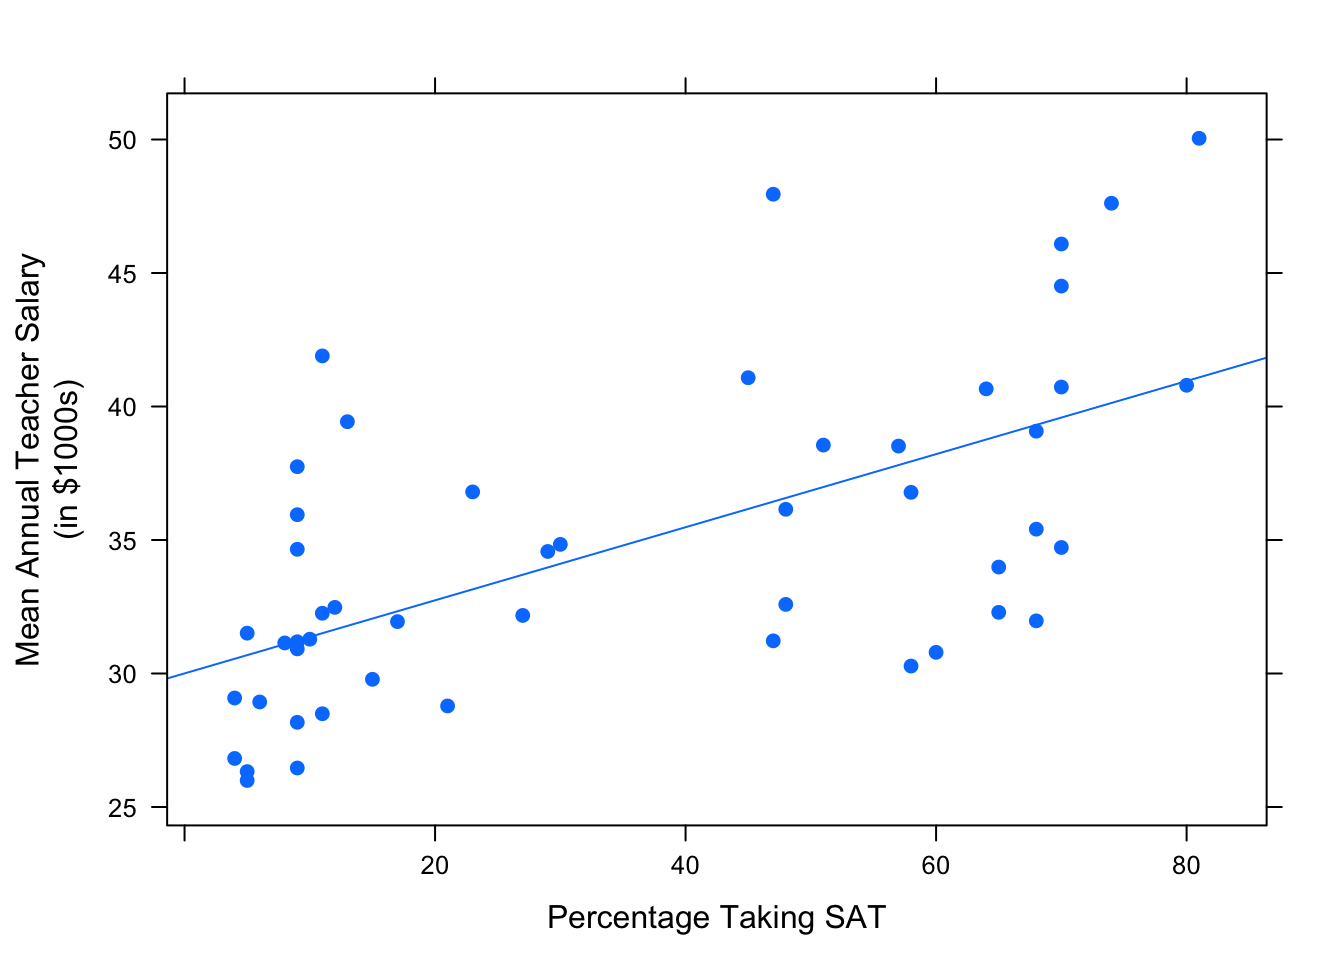 Frac/Salary Scatterplot:  Percentage of students in the state that take the SAT vs. the average annual teacher salary.